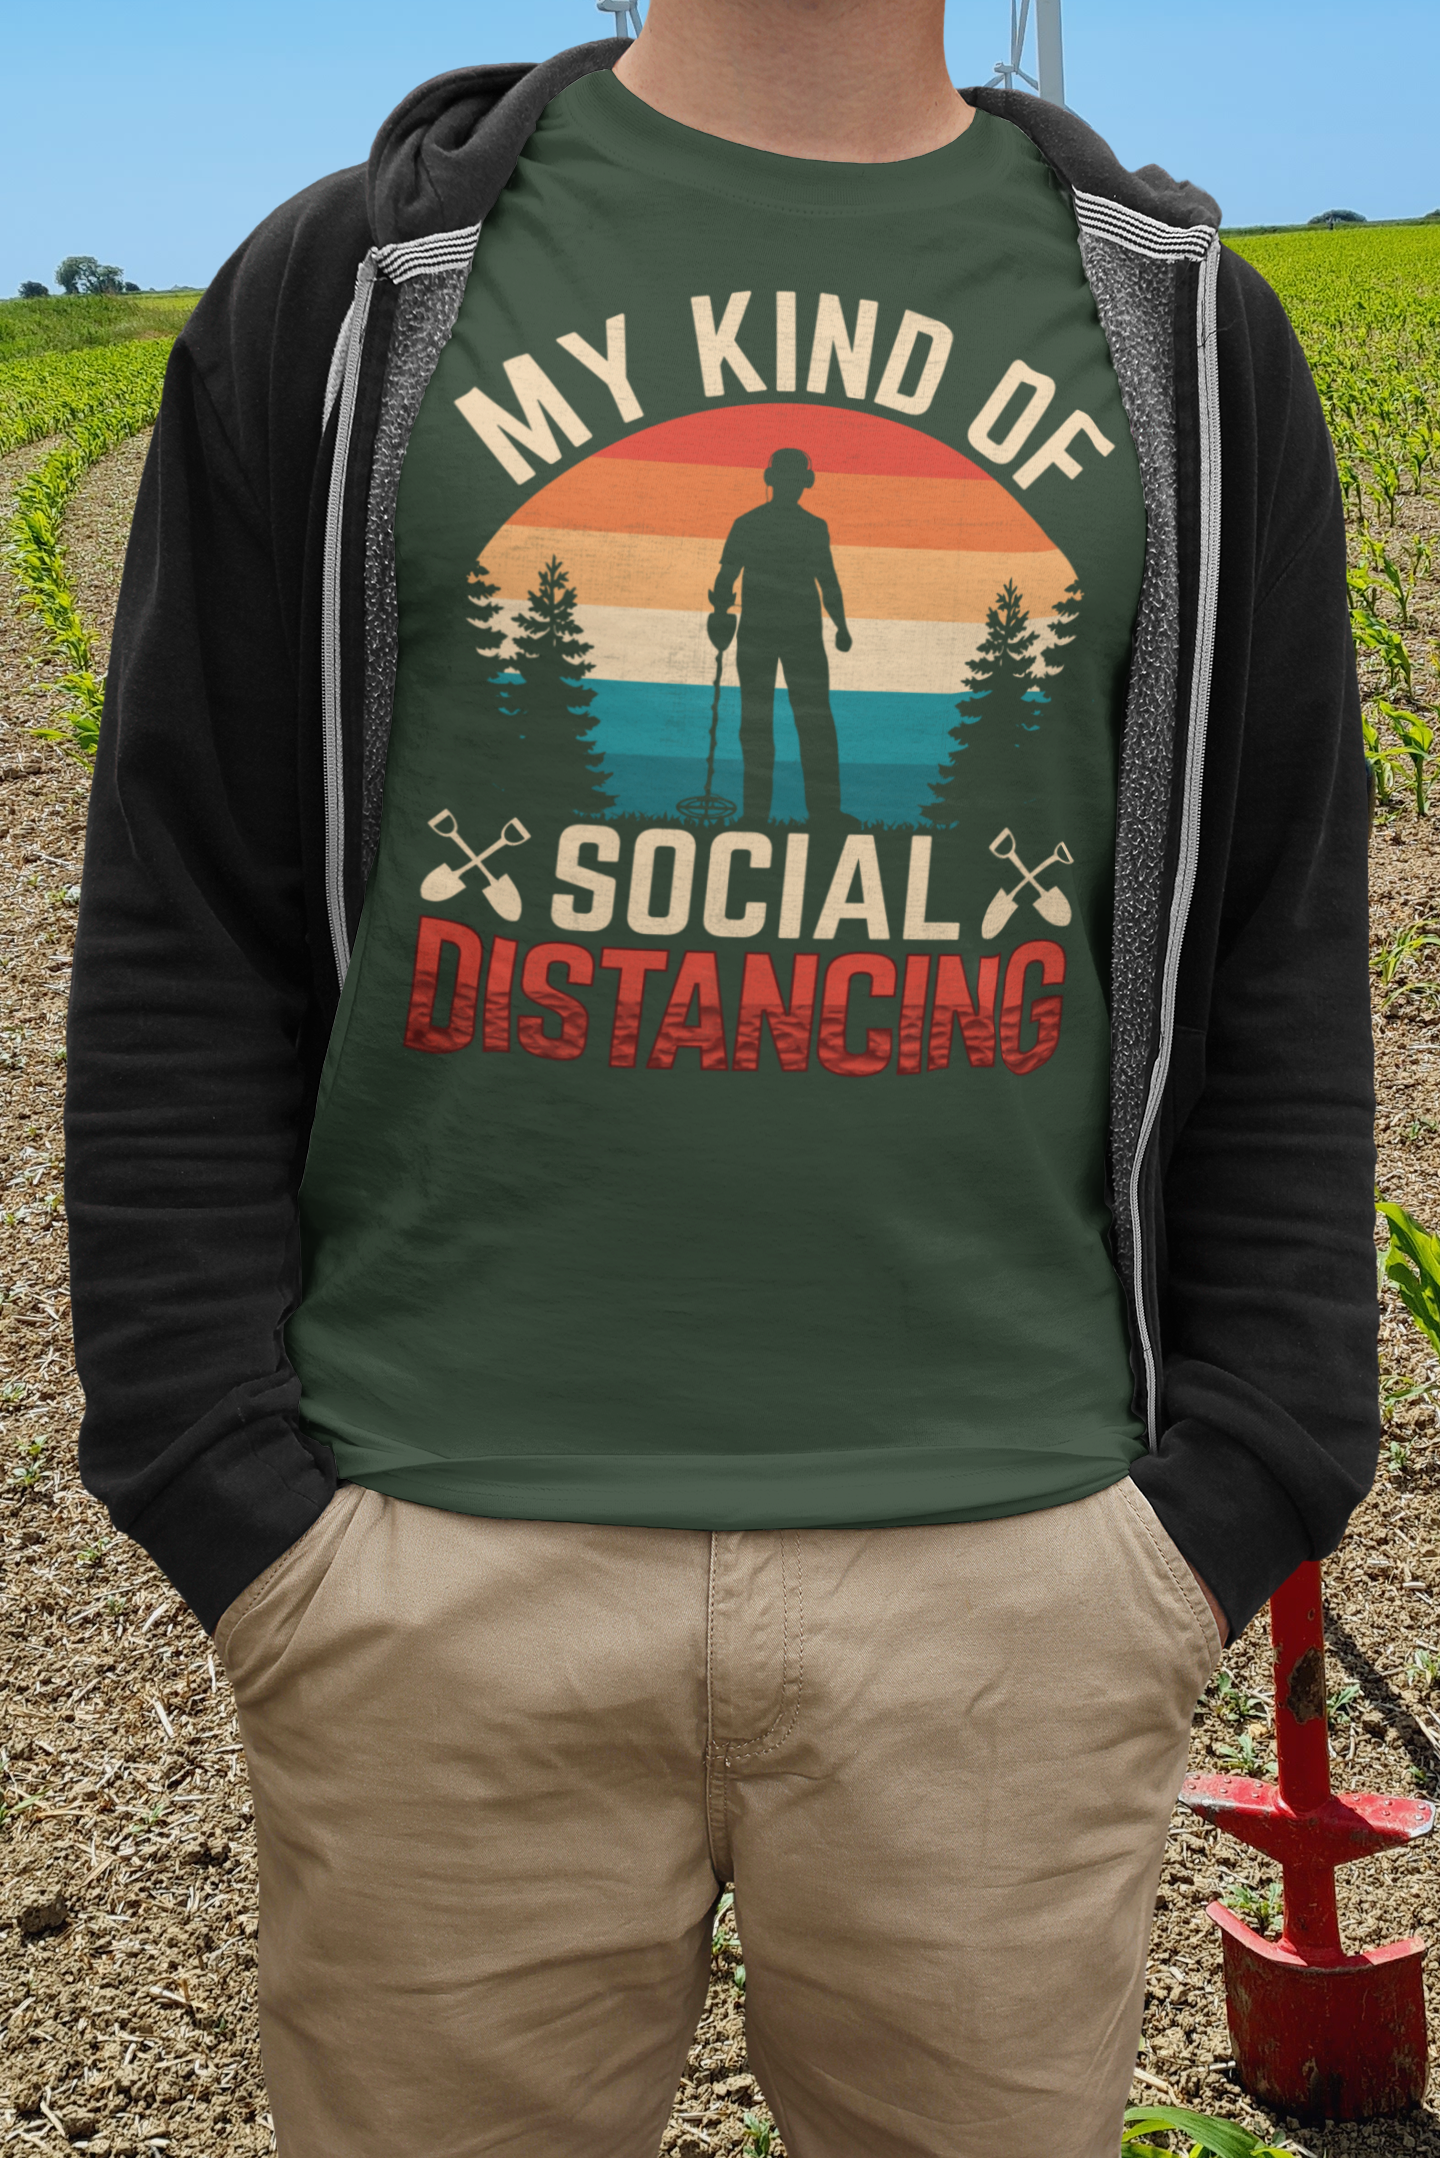 My kind of social distancing T-shirt